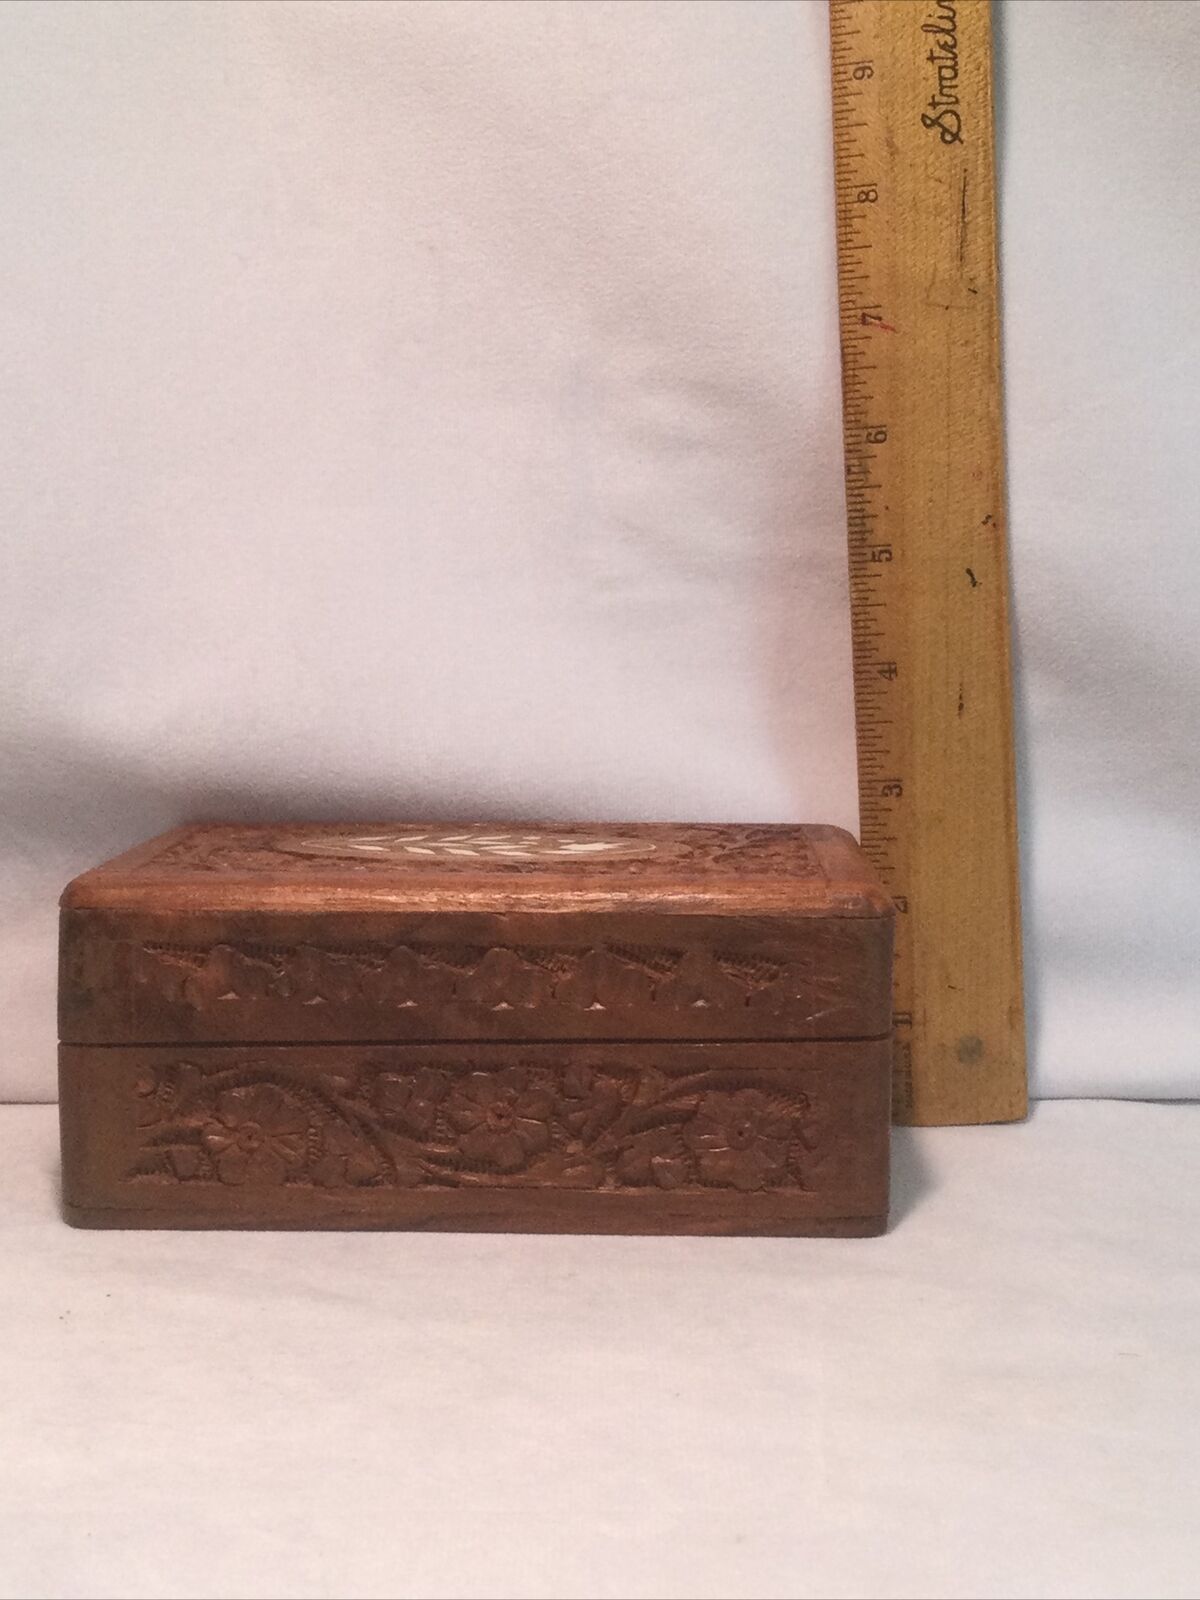 Vintage Hand Carved Teak Wooden Jewelry Box Made in India